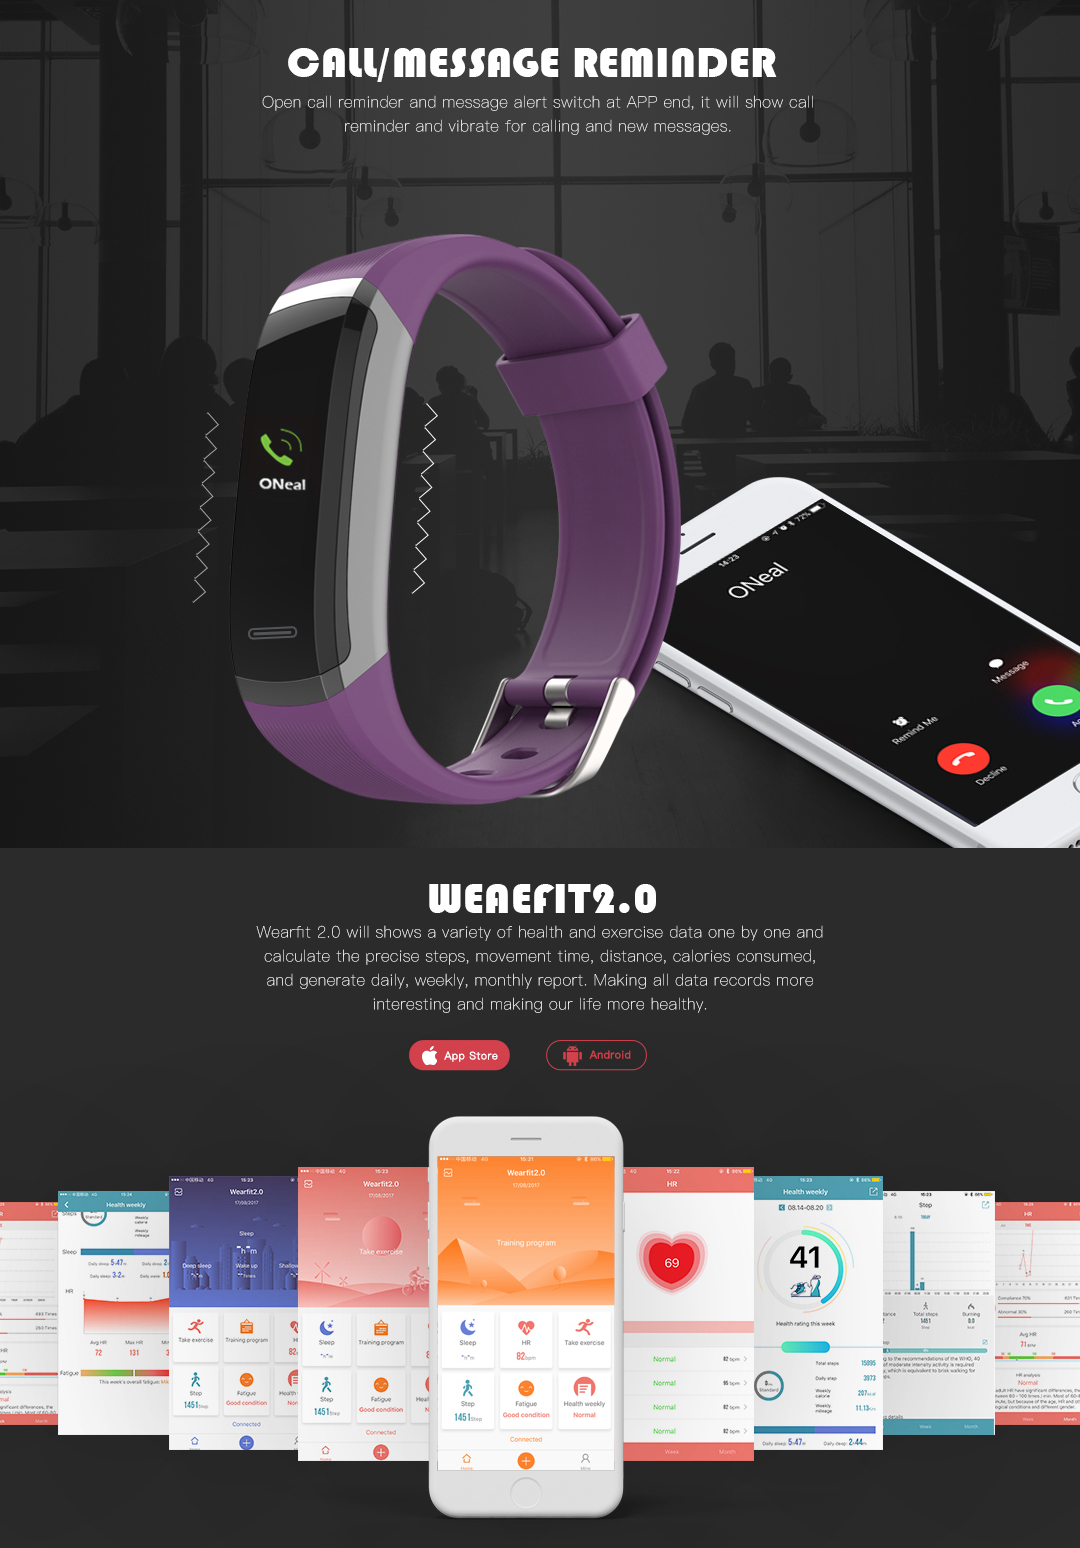 Bakeey GT101 0.96inch Color Screen Heart Rate Monitor Fitness Tracker bluetooth Smart Wristband